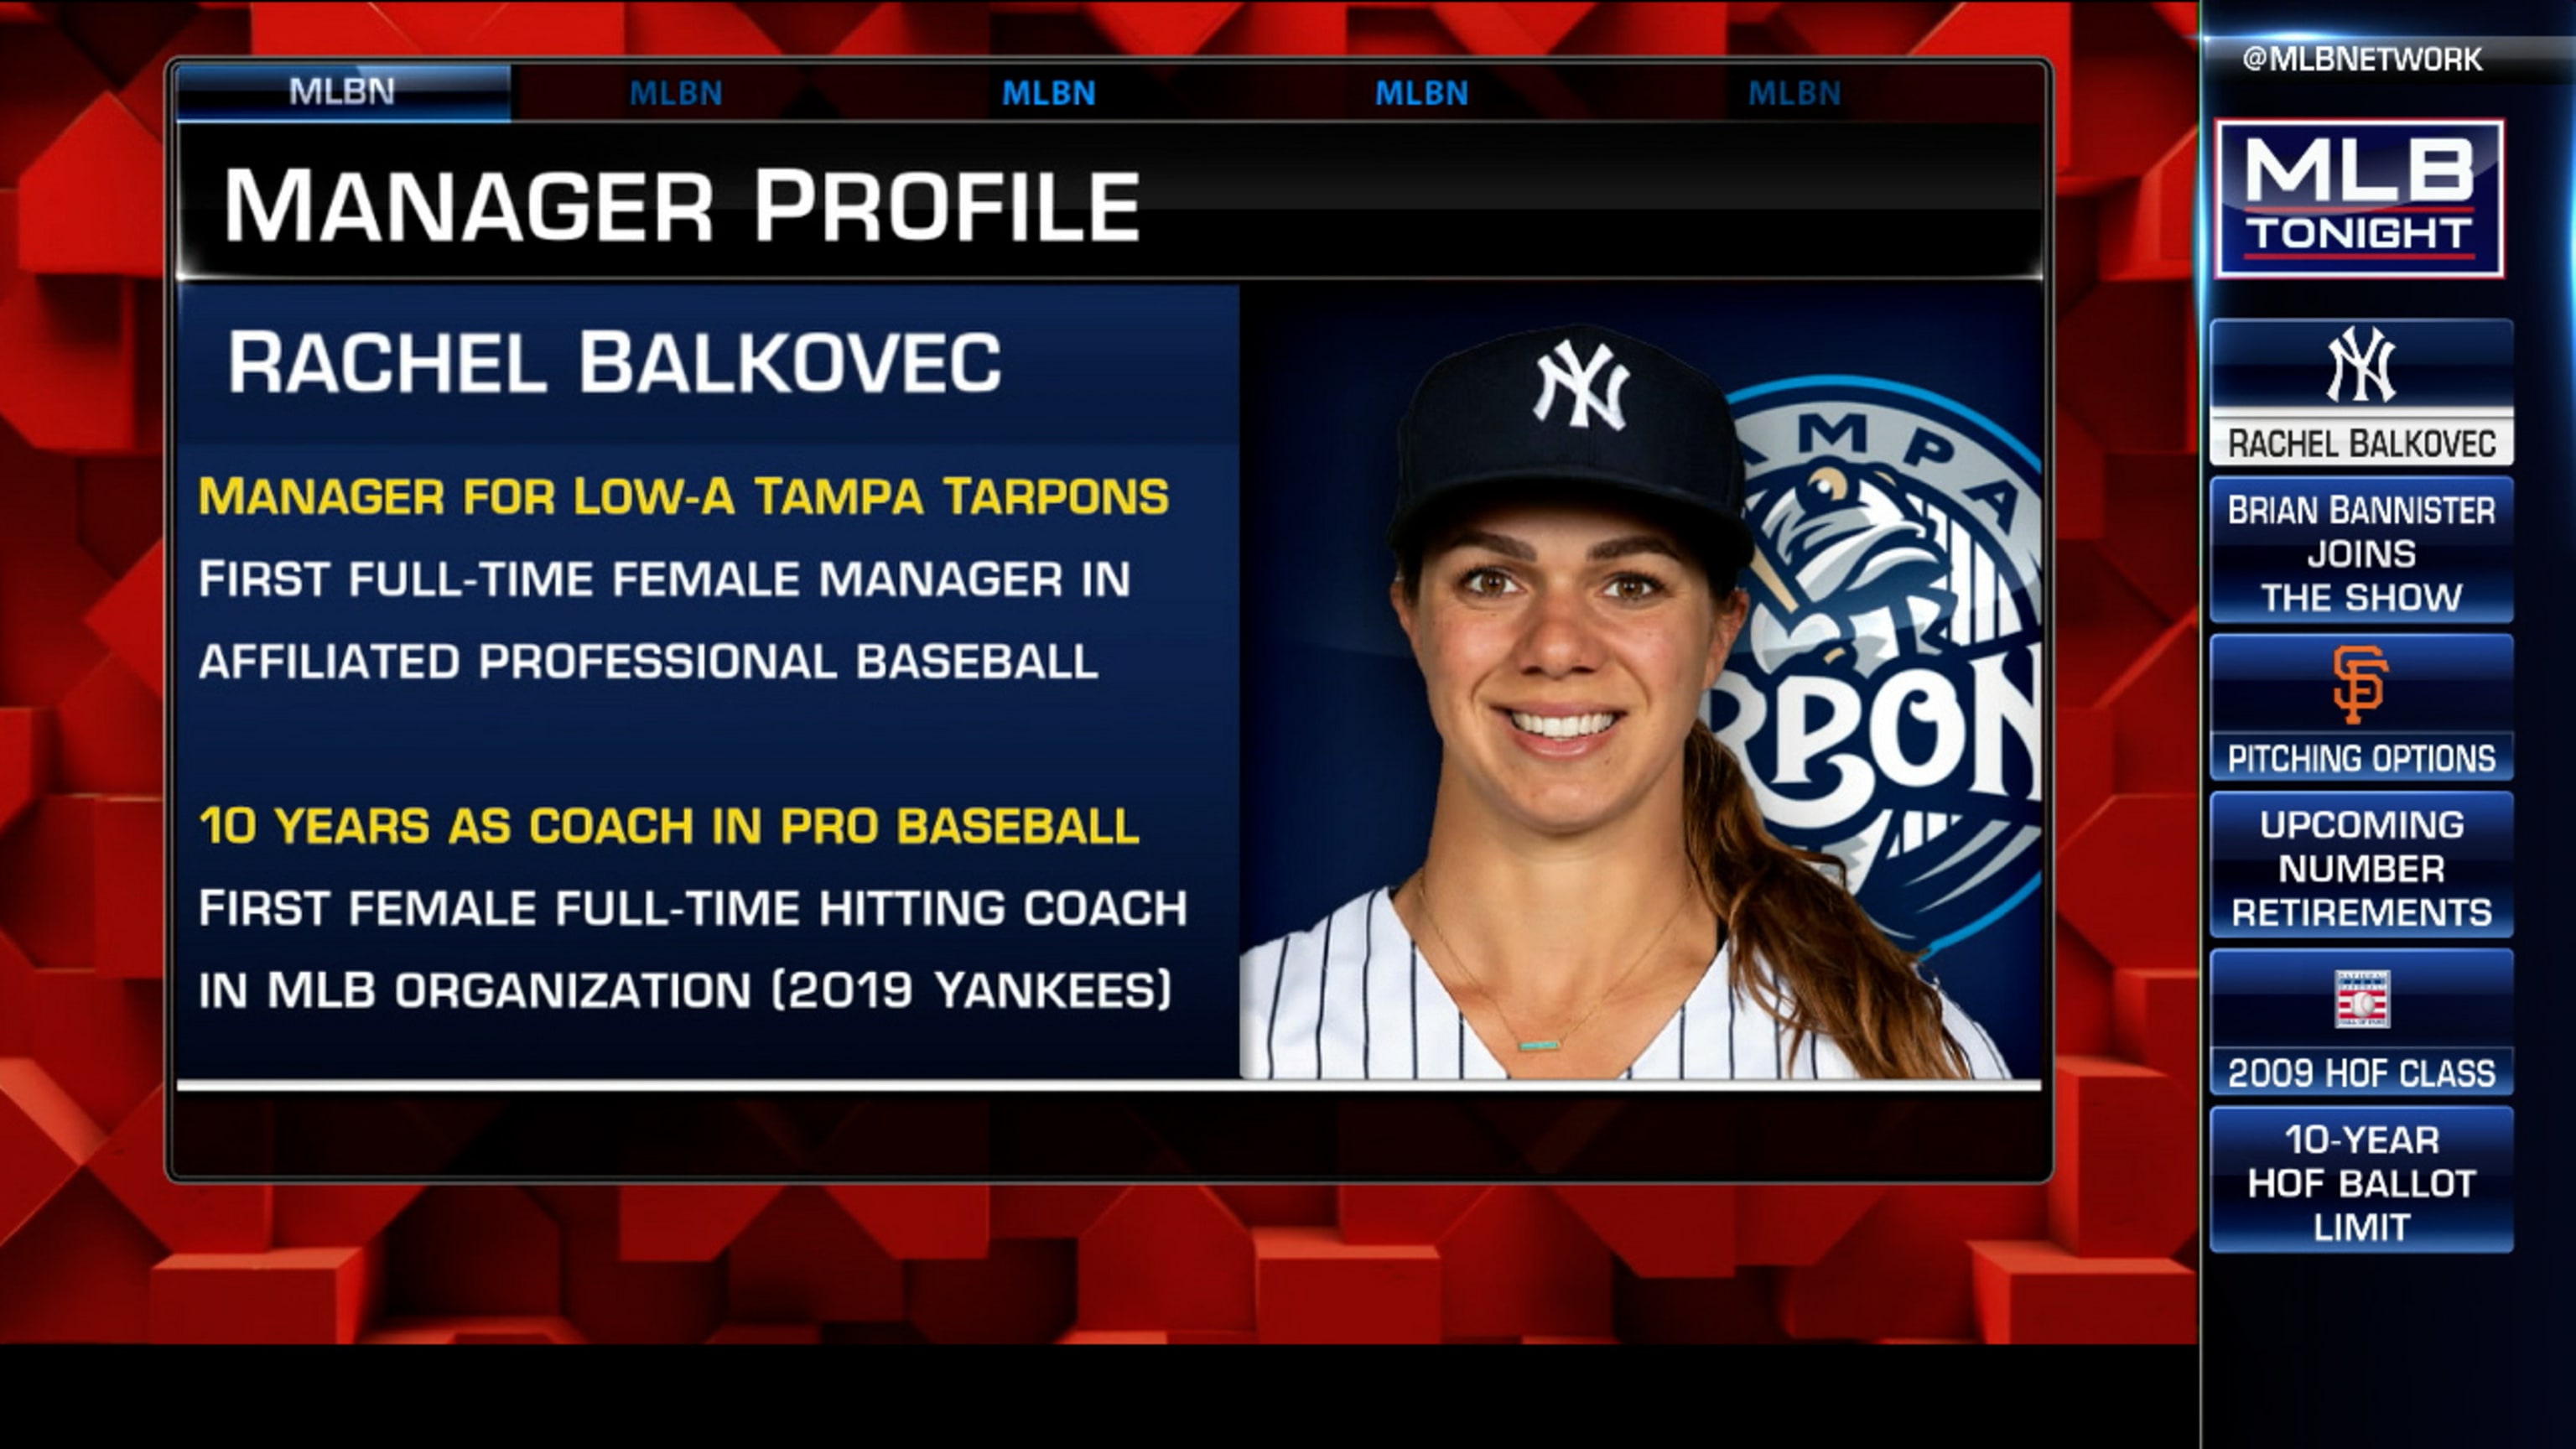 Rachel Balkovec on historic hire as Minor League manager